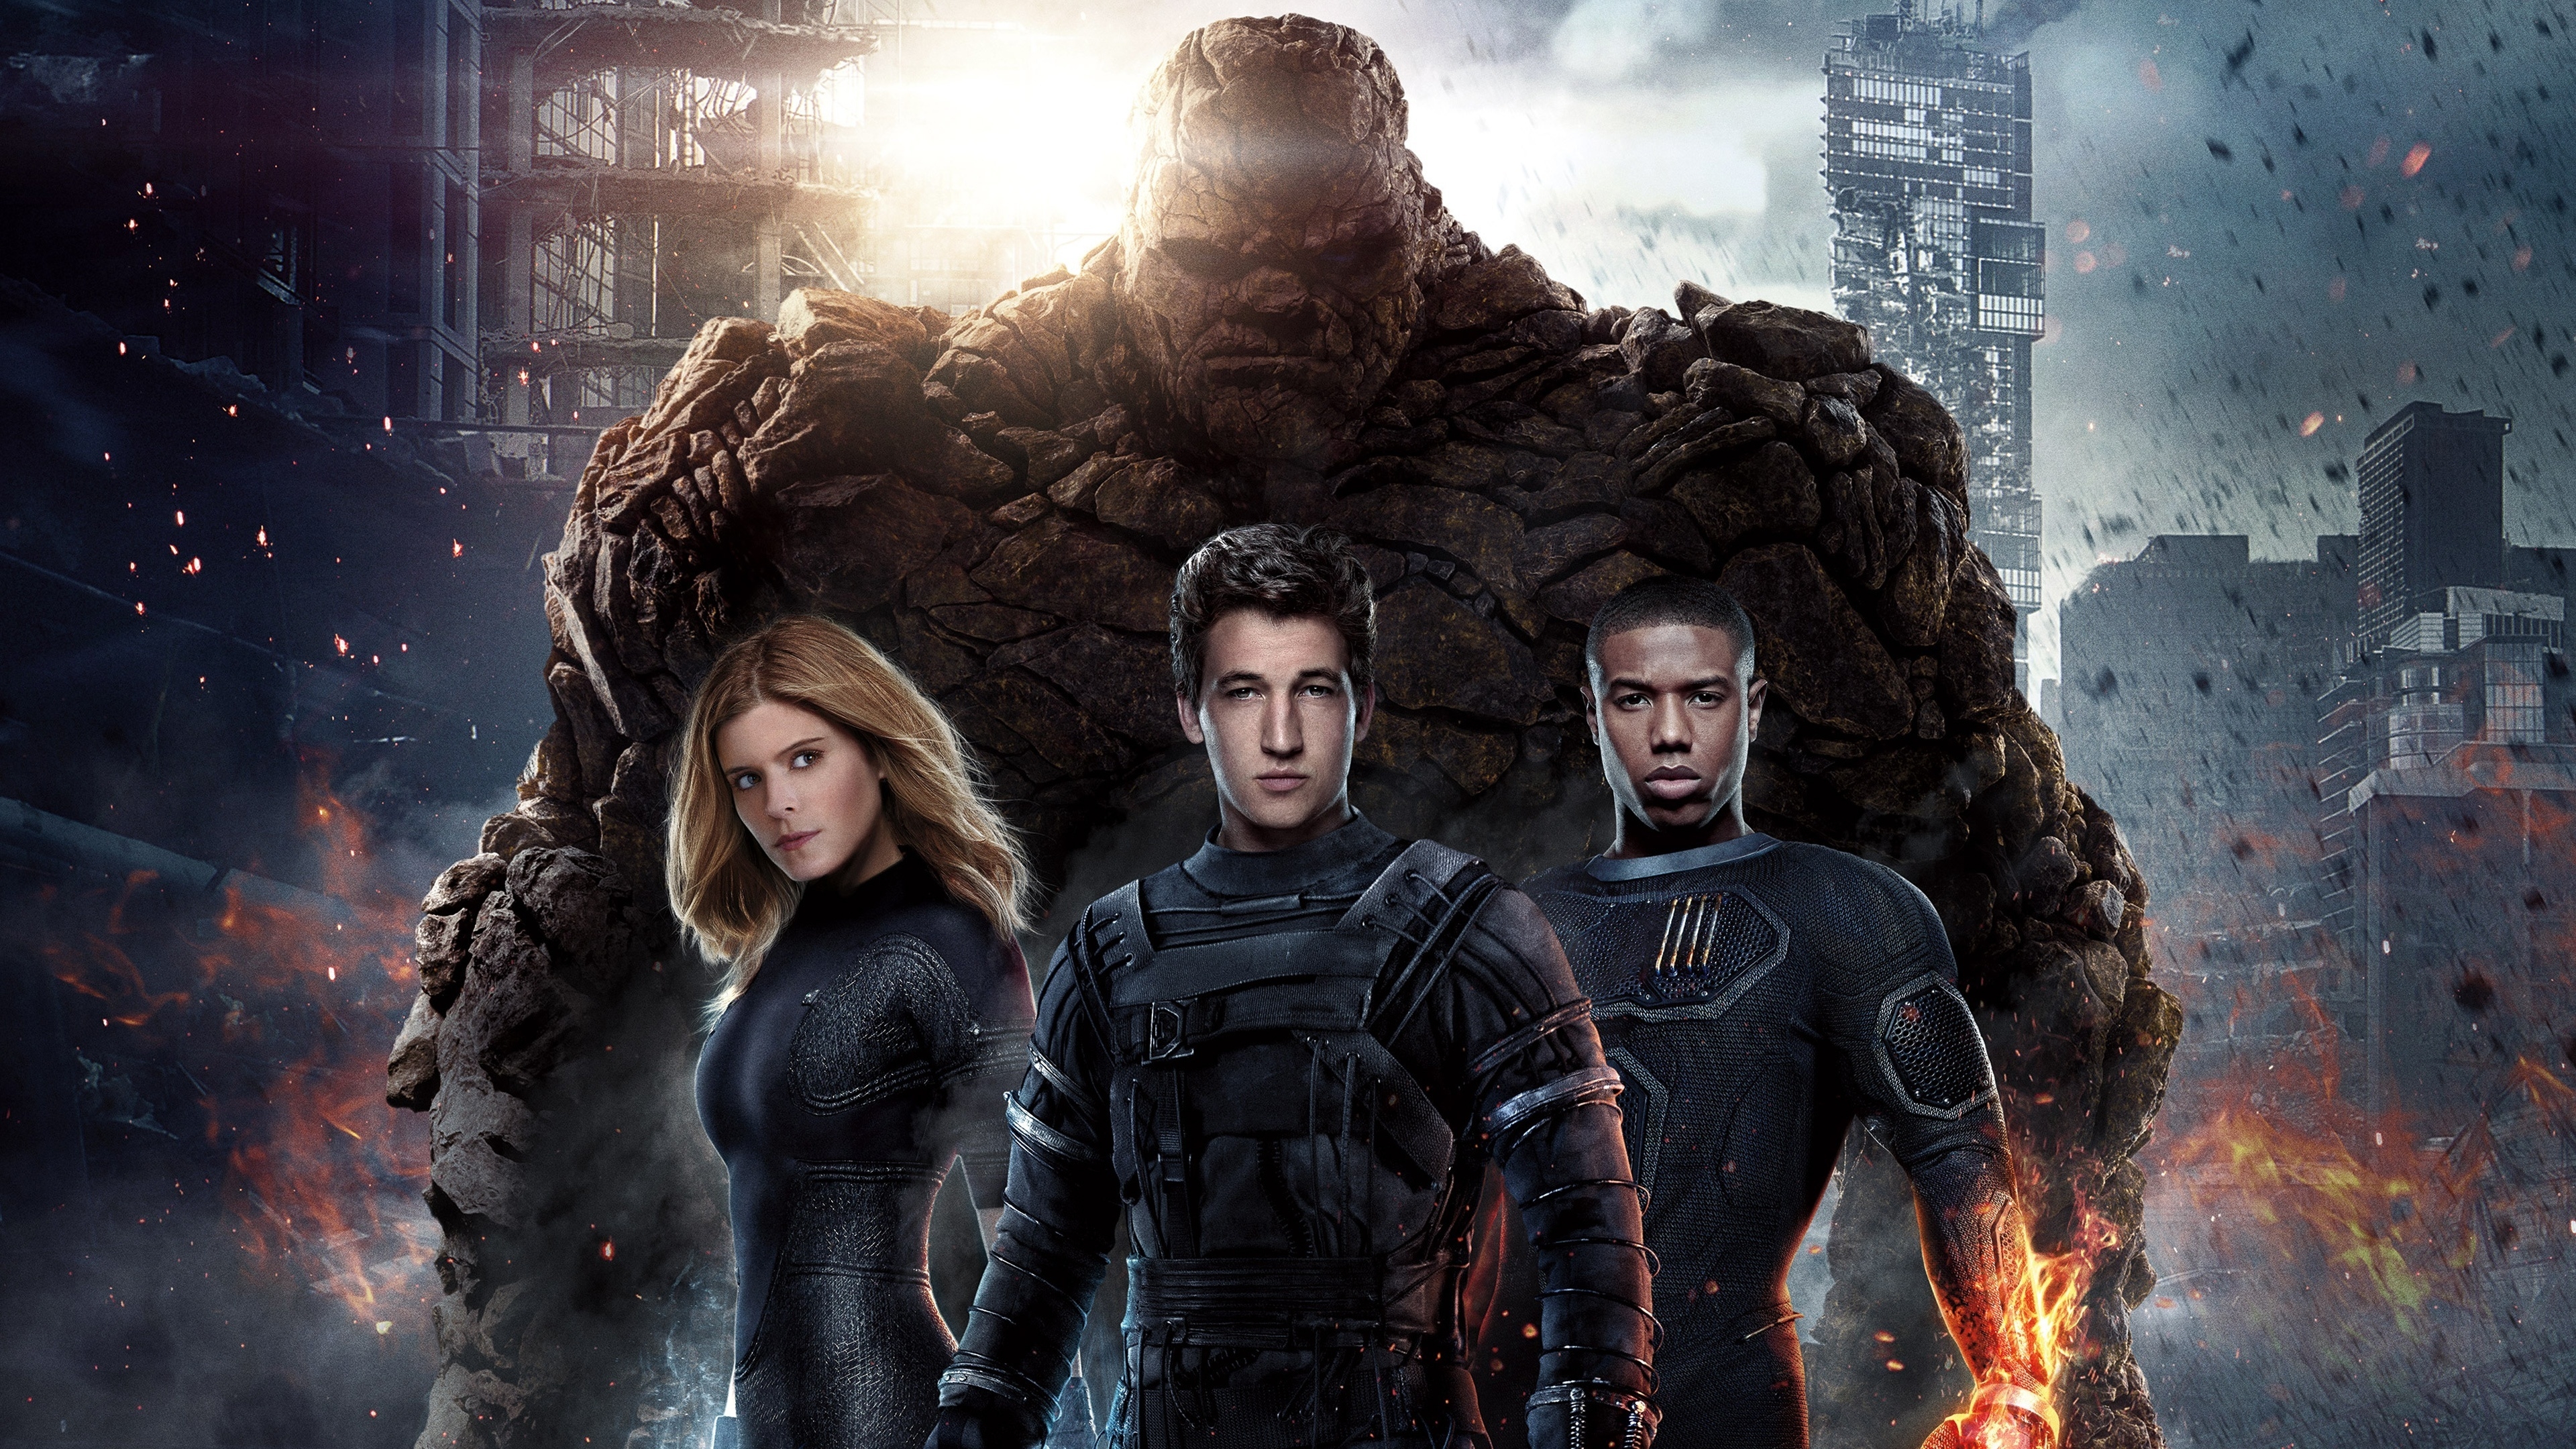 Fantastic Four for 3840 x 2160 Ultra HD resolution